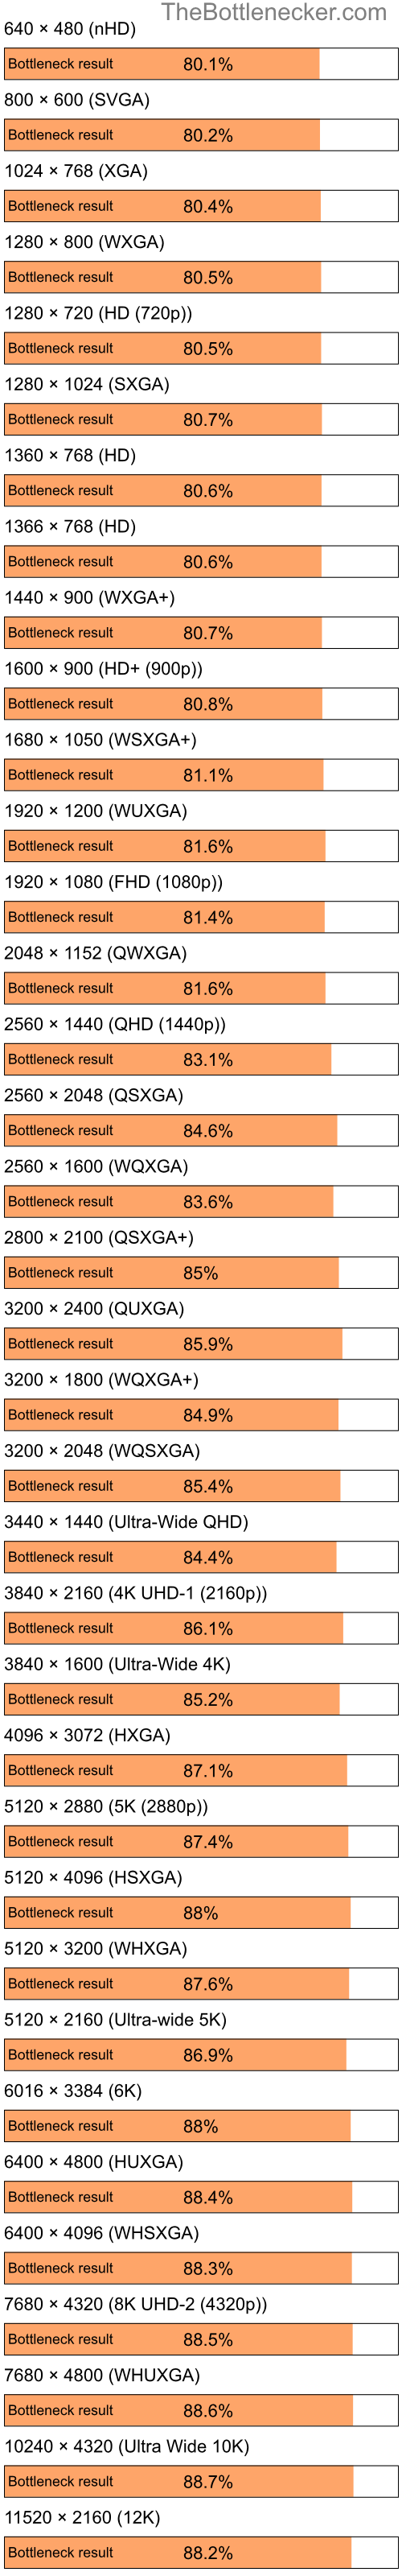 Bottleneck results by resolution for Intel Celeron and AMD Mobility Radeon 9700 in Graphic Card Intense Tasks